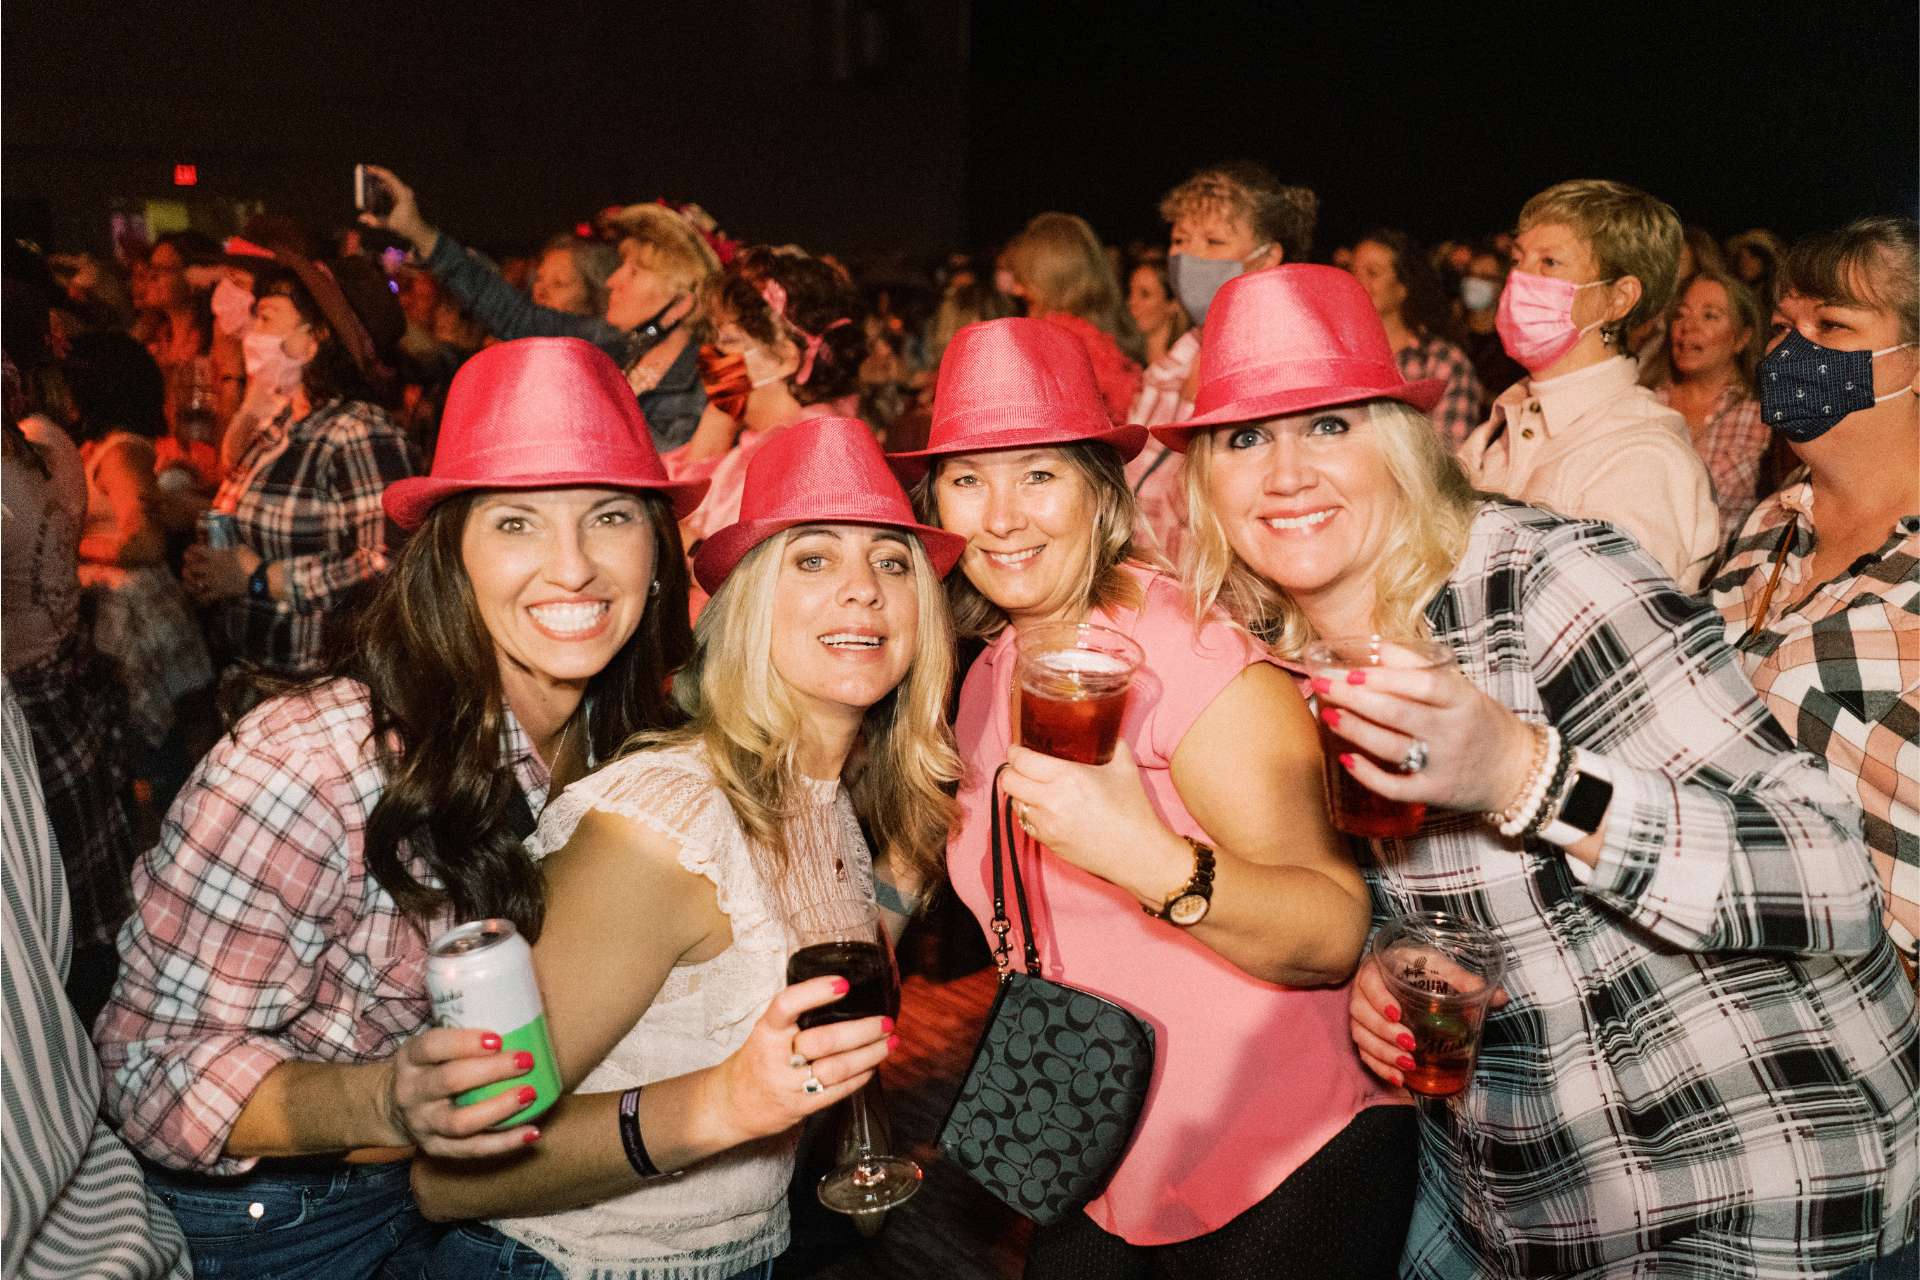 A group of 4 women in pink cowboy hats